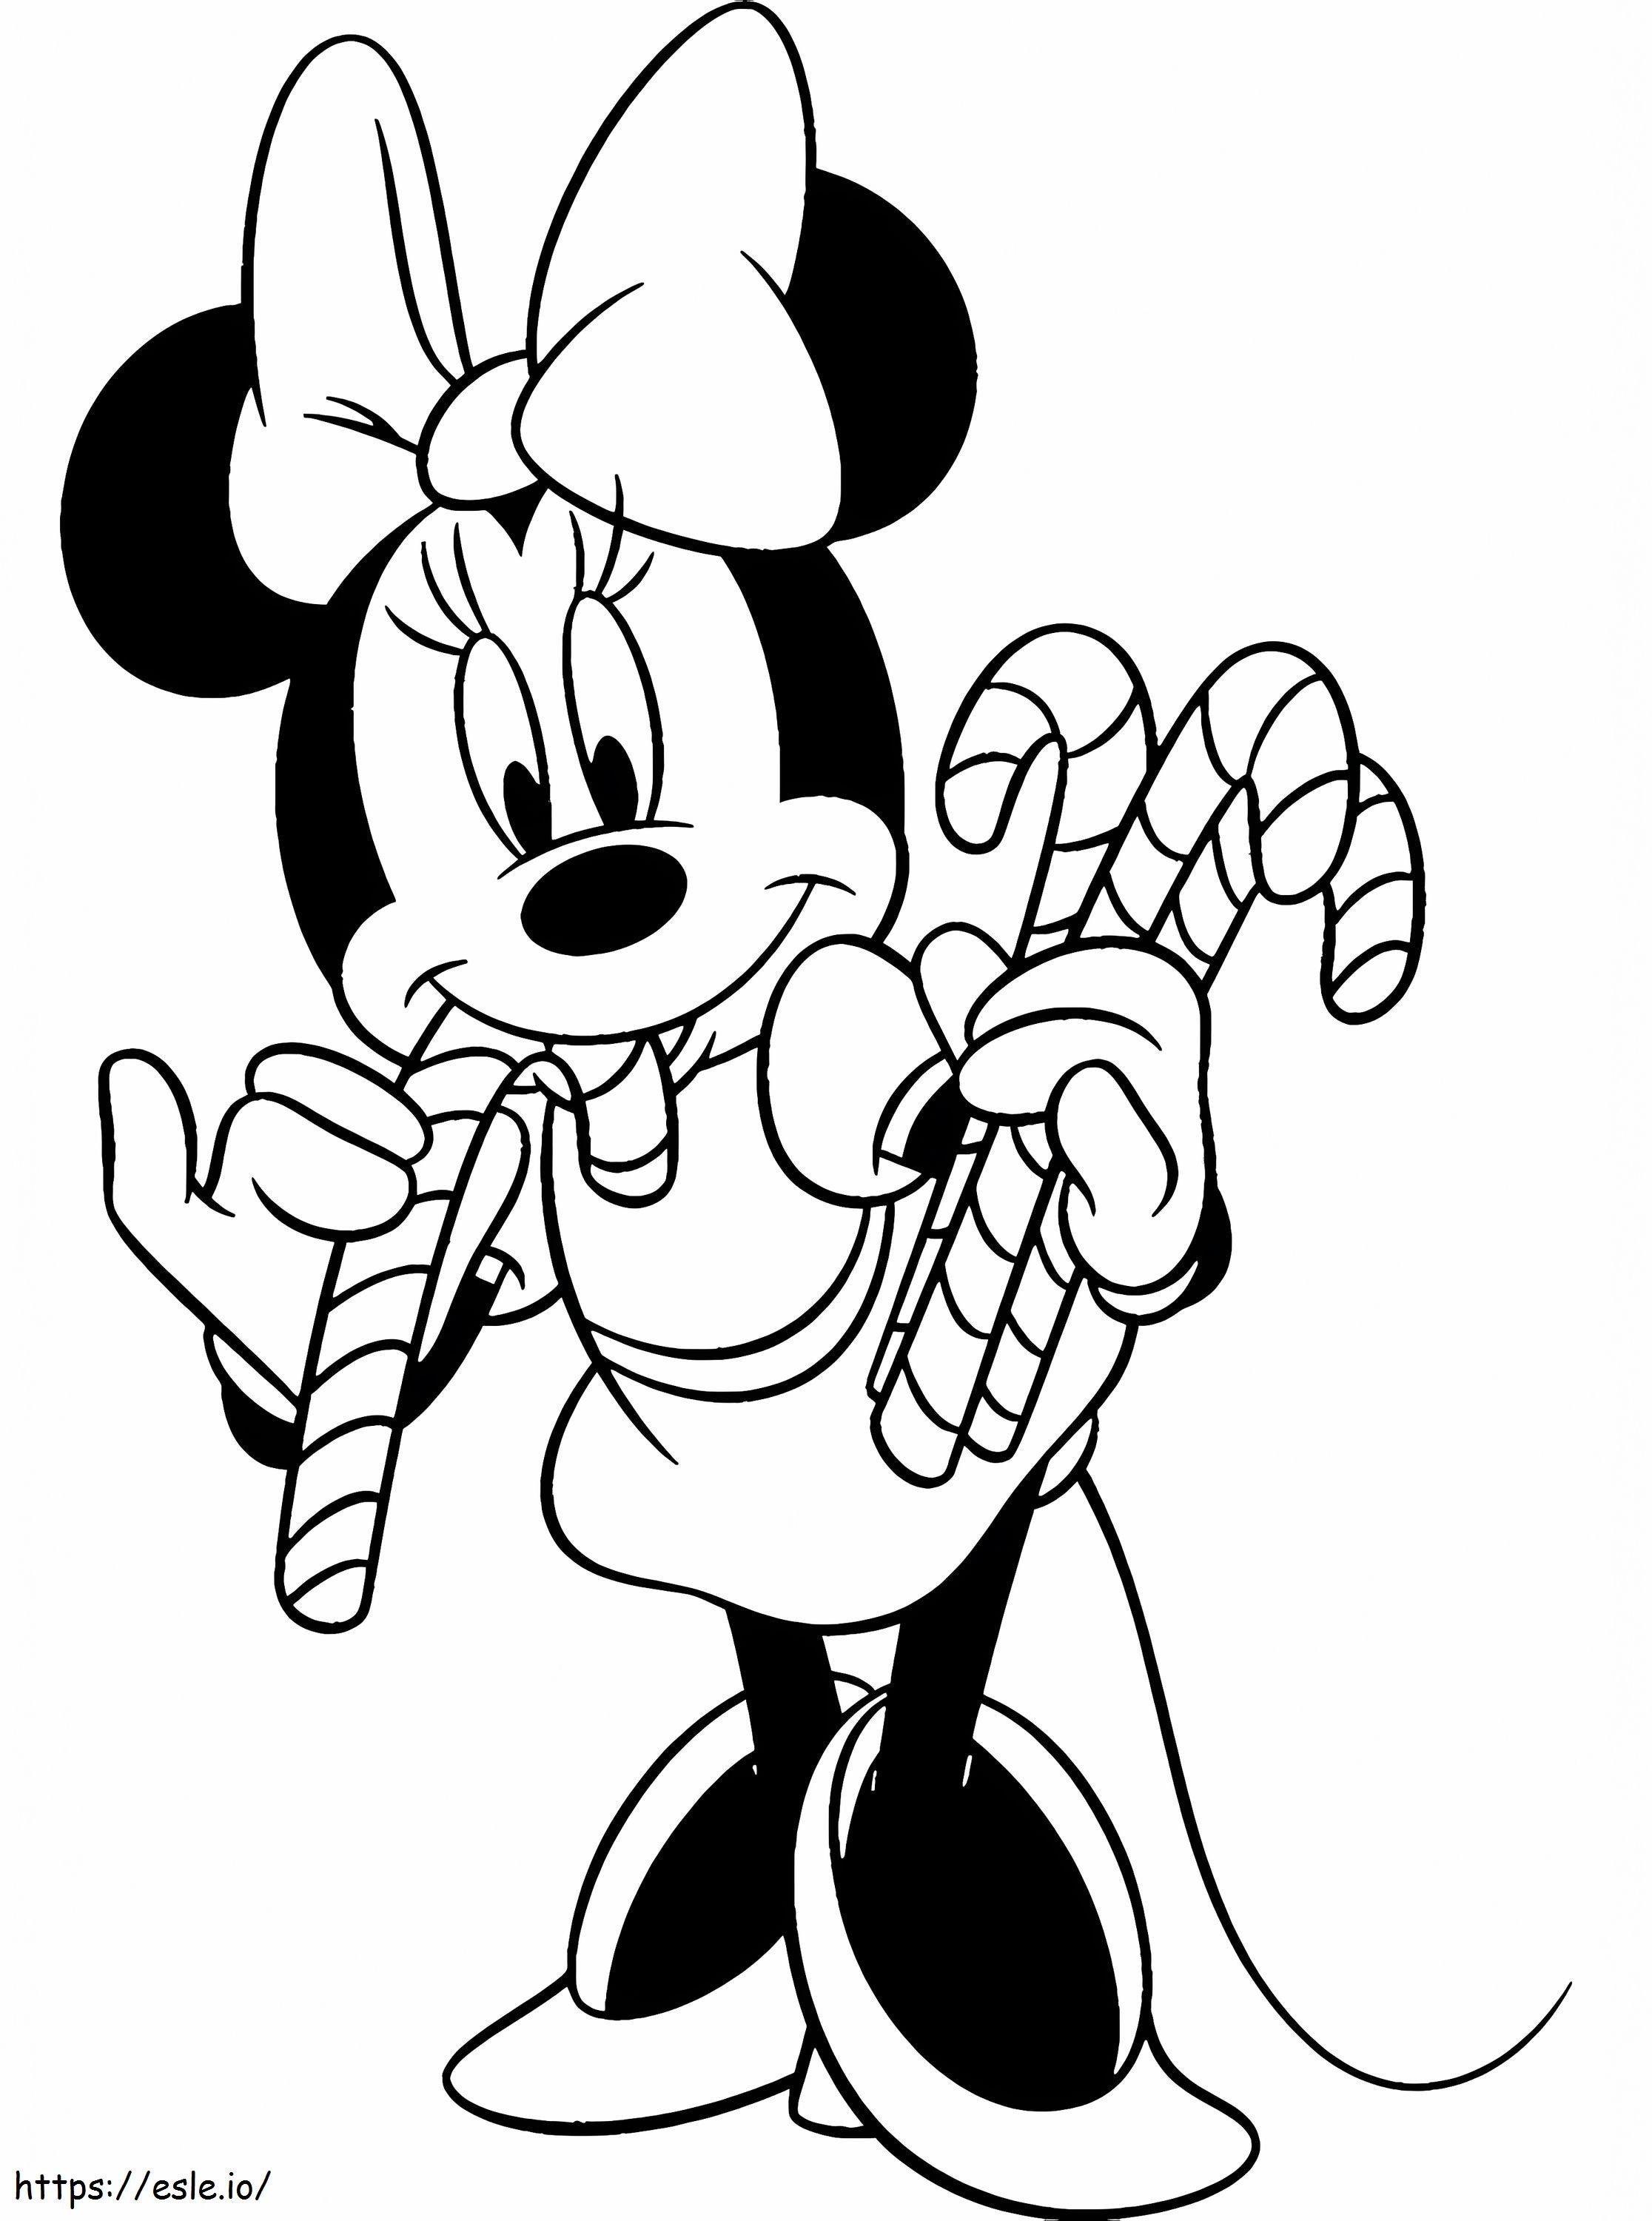 Jolie Minnie Mouse coloring page